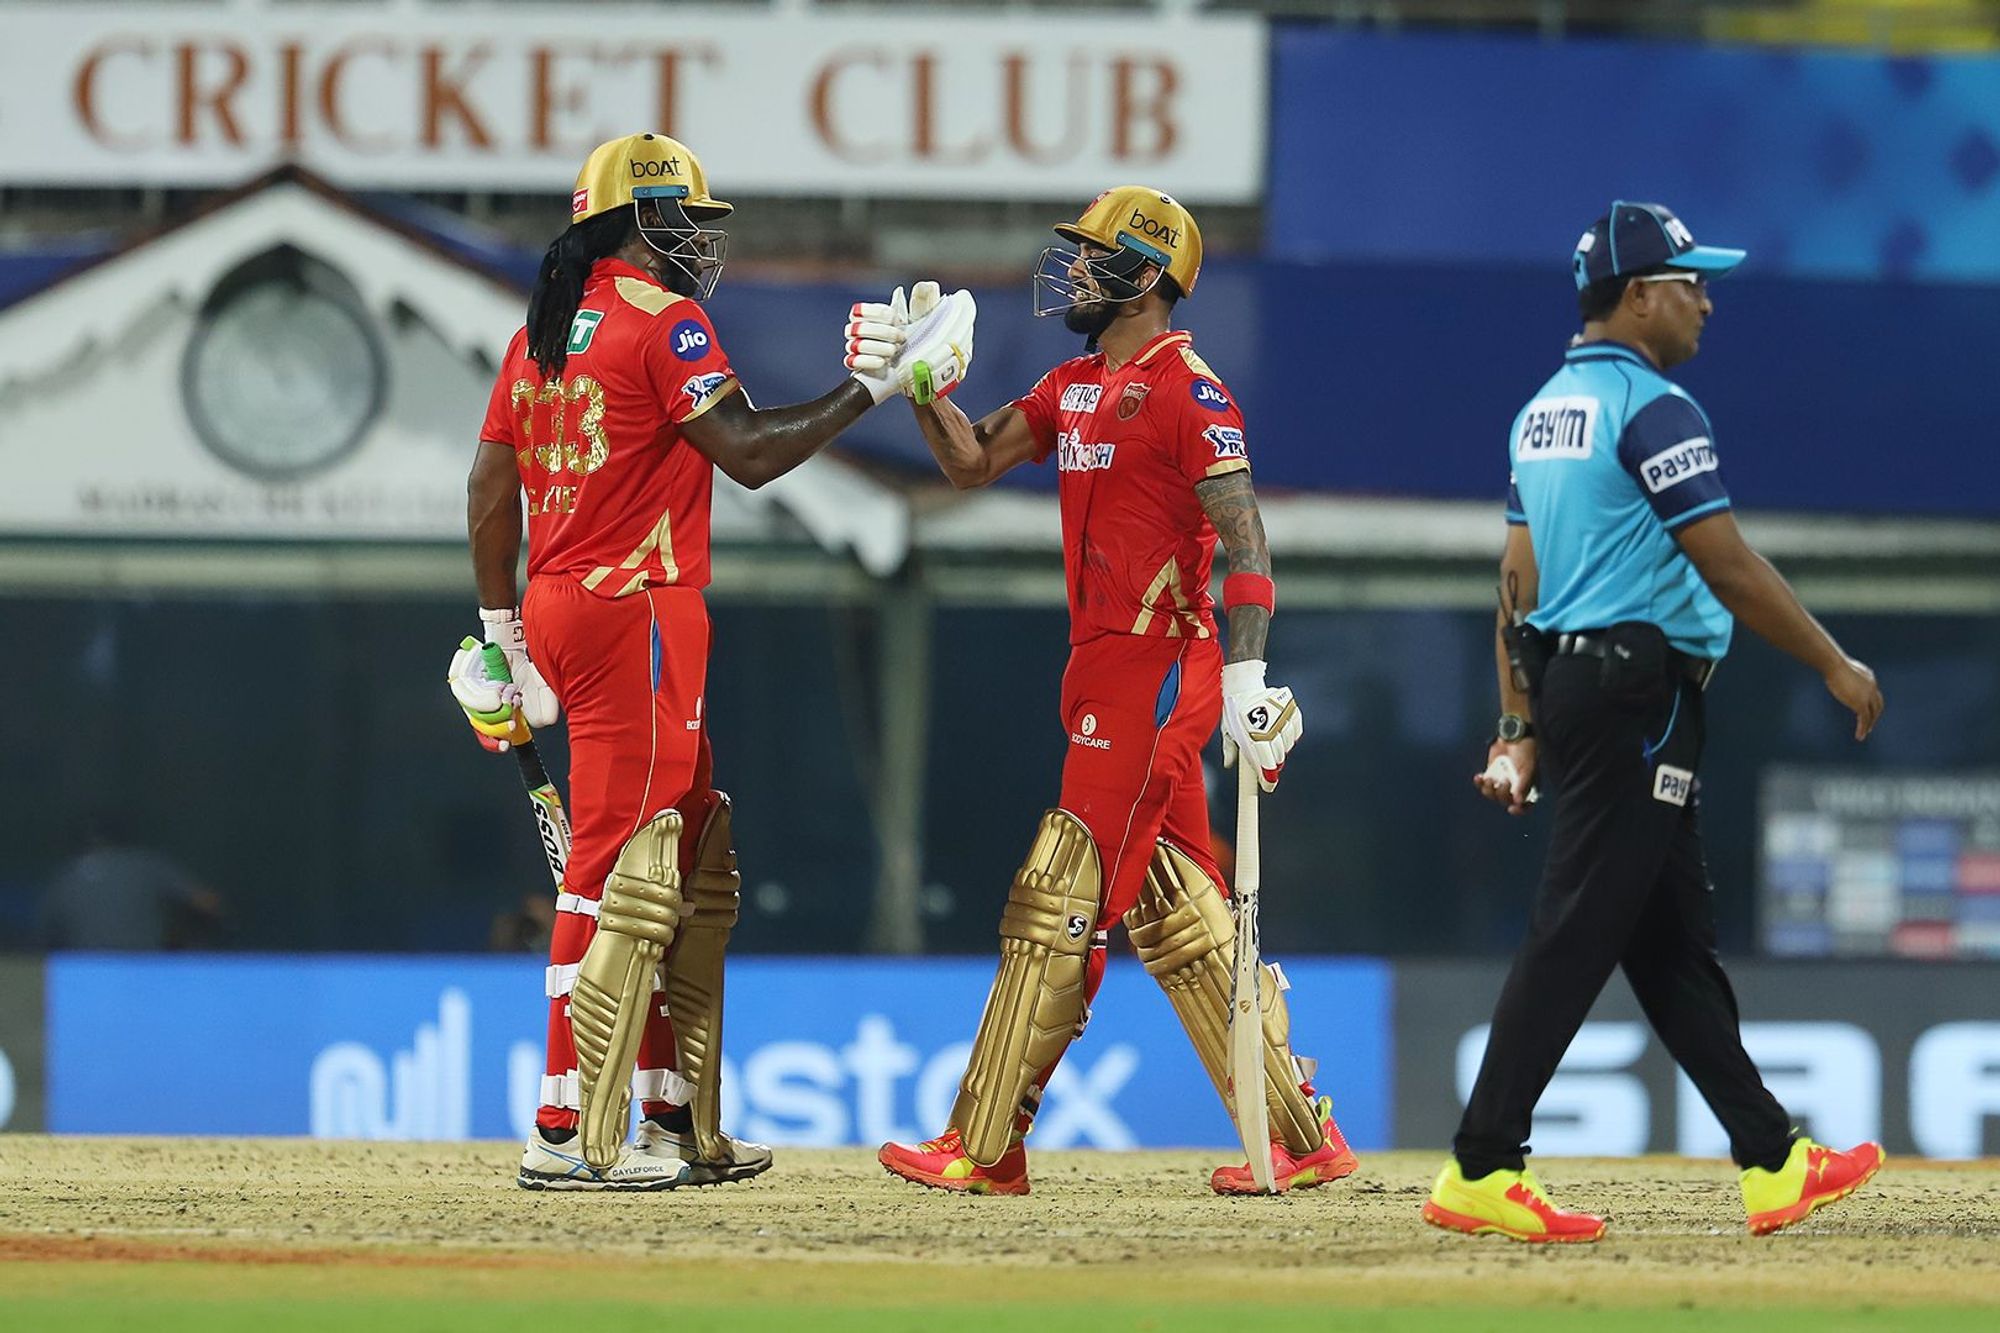 Chris Gayle (L) and KL Rahul (R) helped PBKS defeat MI by 9 wickets | BCCI/IPL